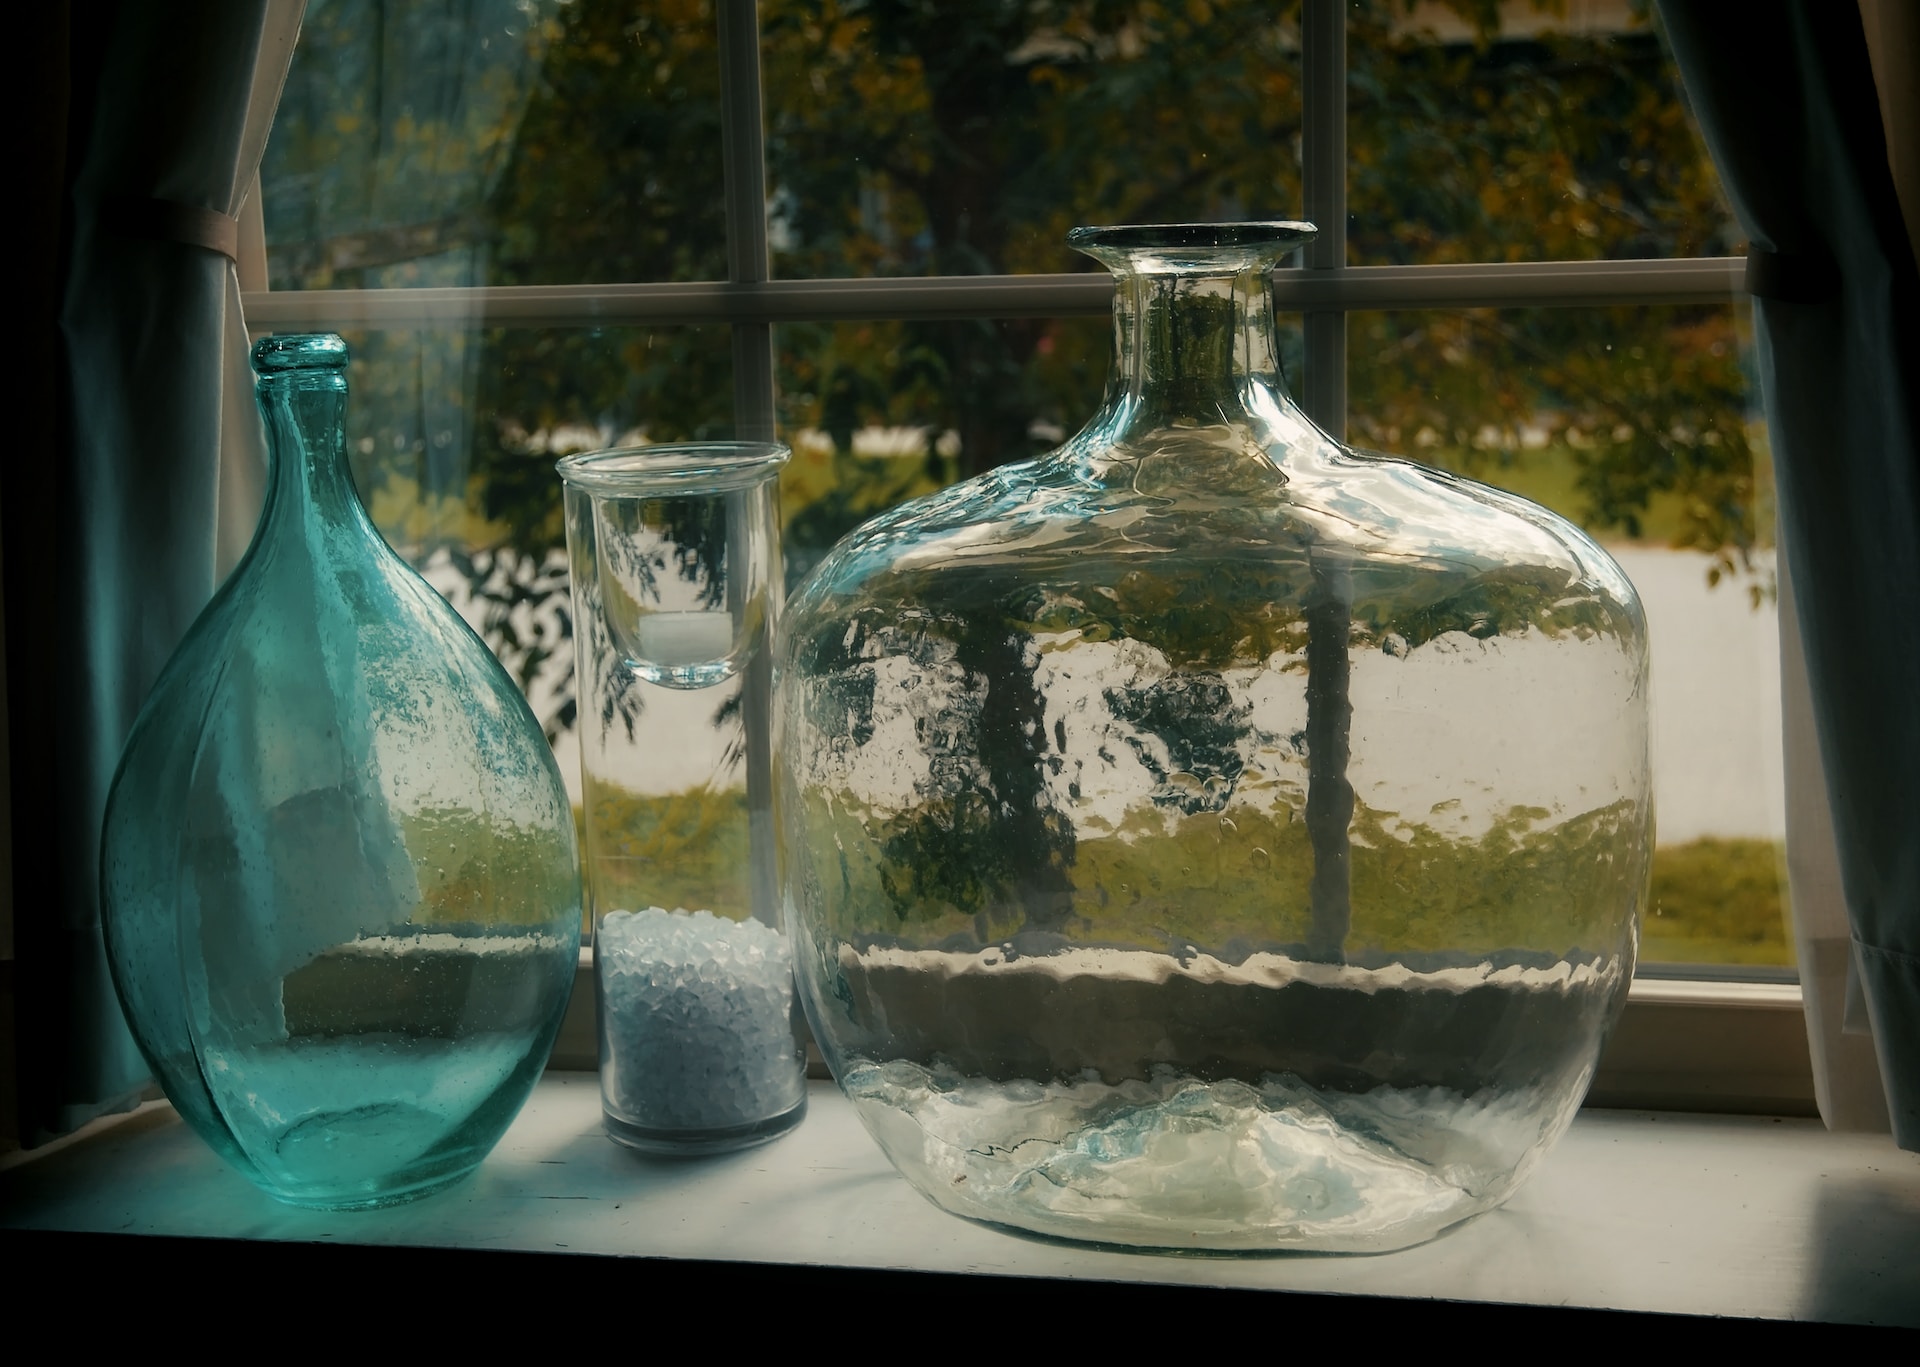  large glass vases on a window sill